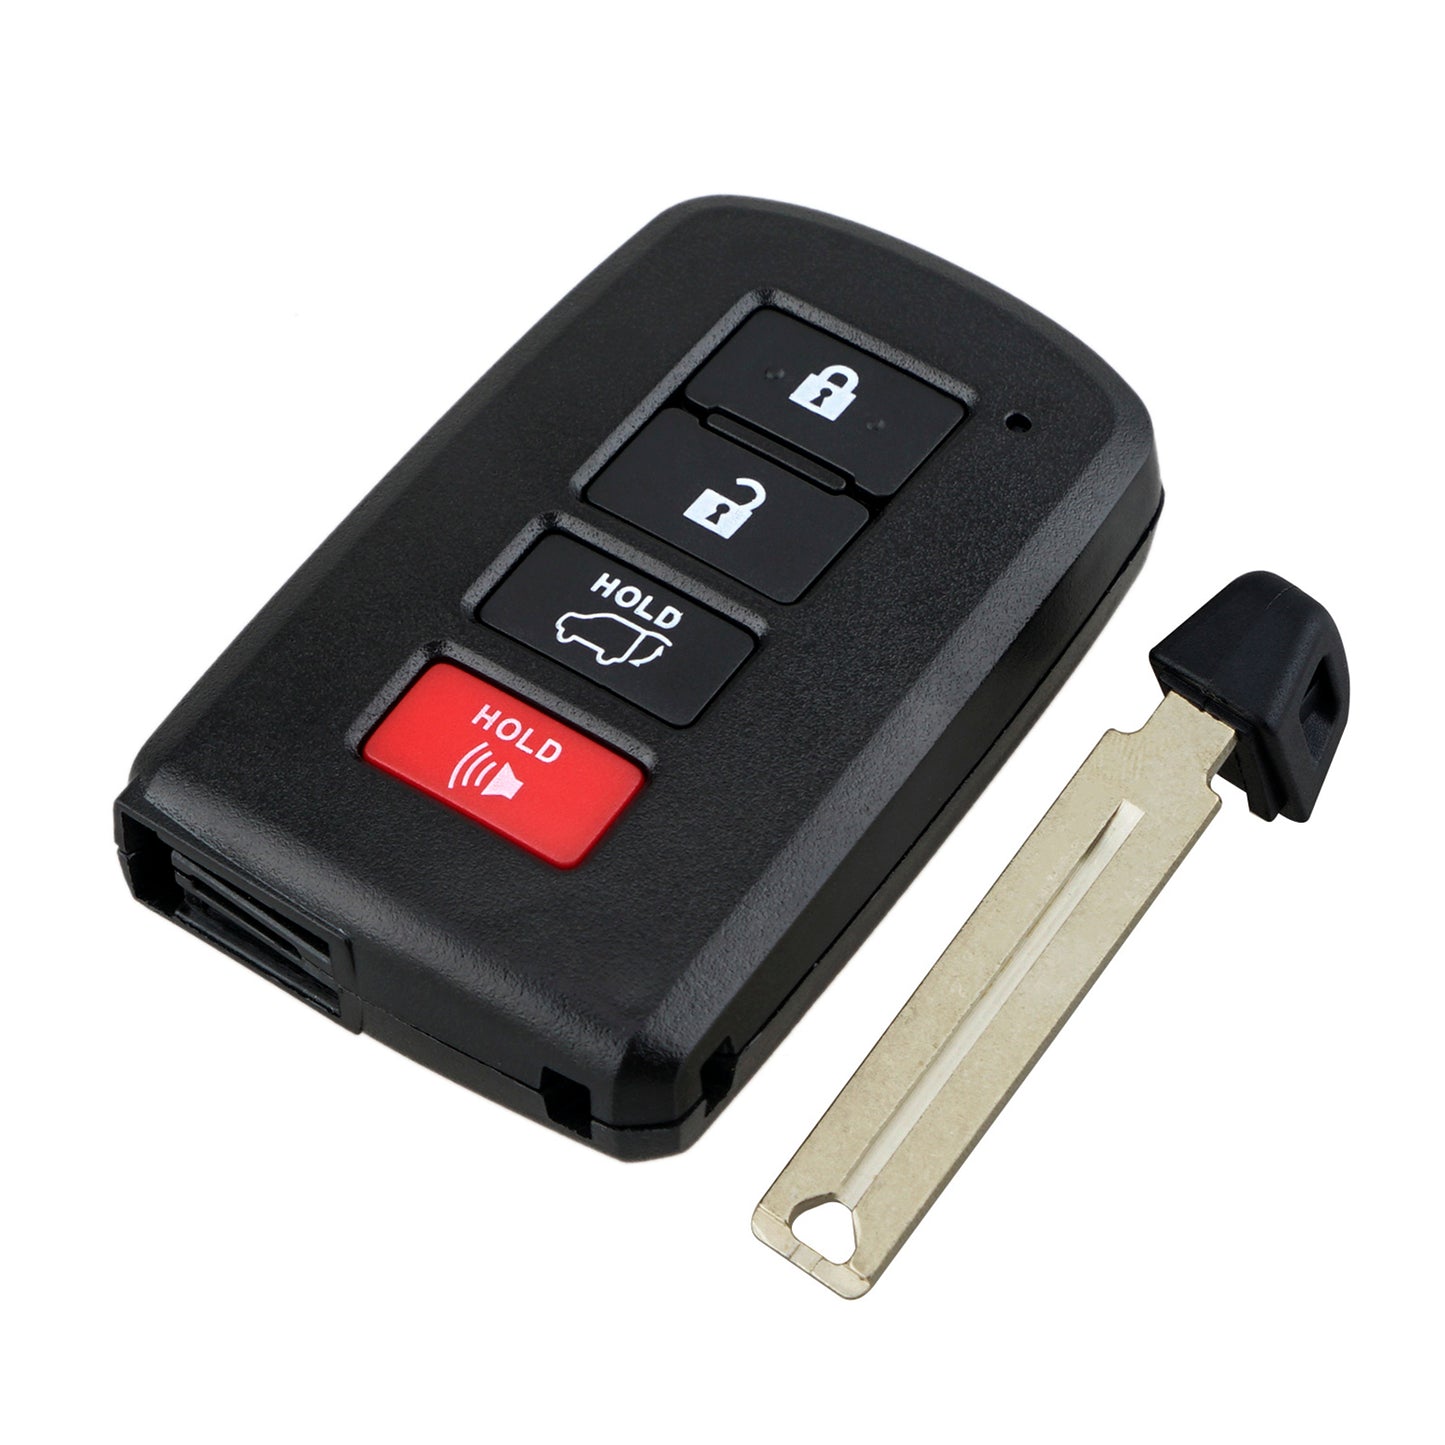 2+1 Buttons 314.3MHz Keyless Entry Fob Remote Car Key For 2012 - 2019 Toyota Highlander Land Cruiser Prius C Sequoia Tacoma Tundra 4Runner FCC ID: HYQ14FBA SKU : J532